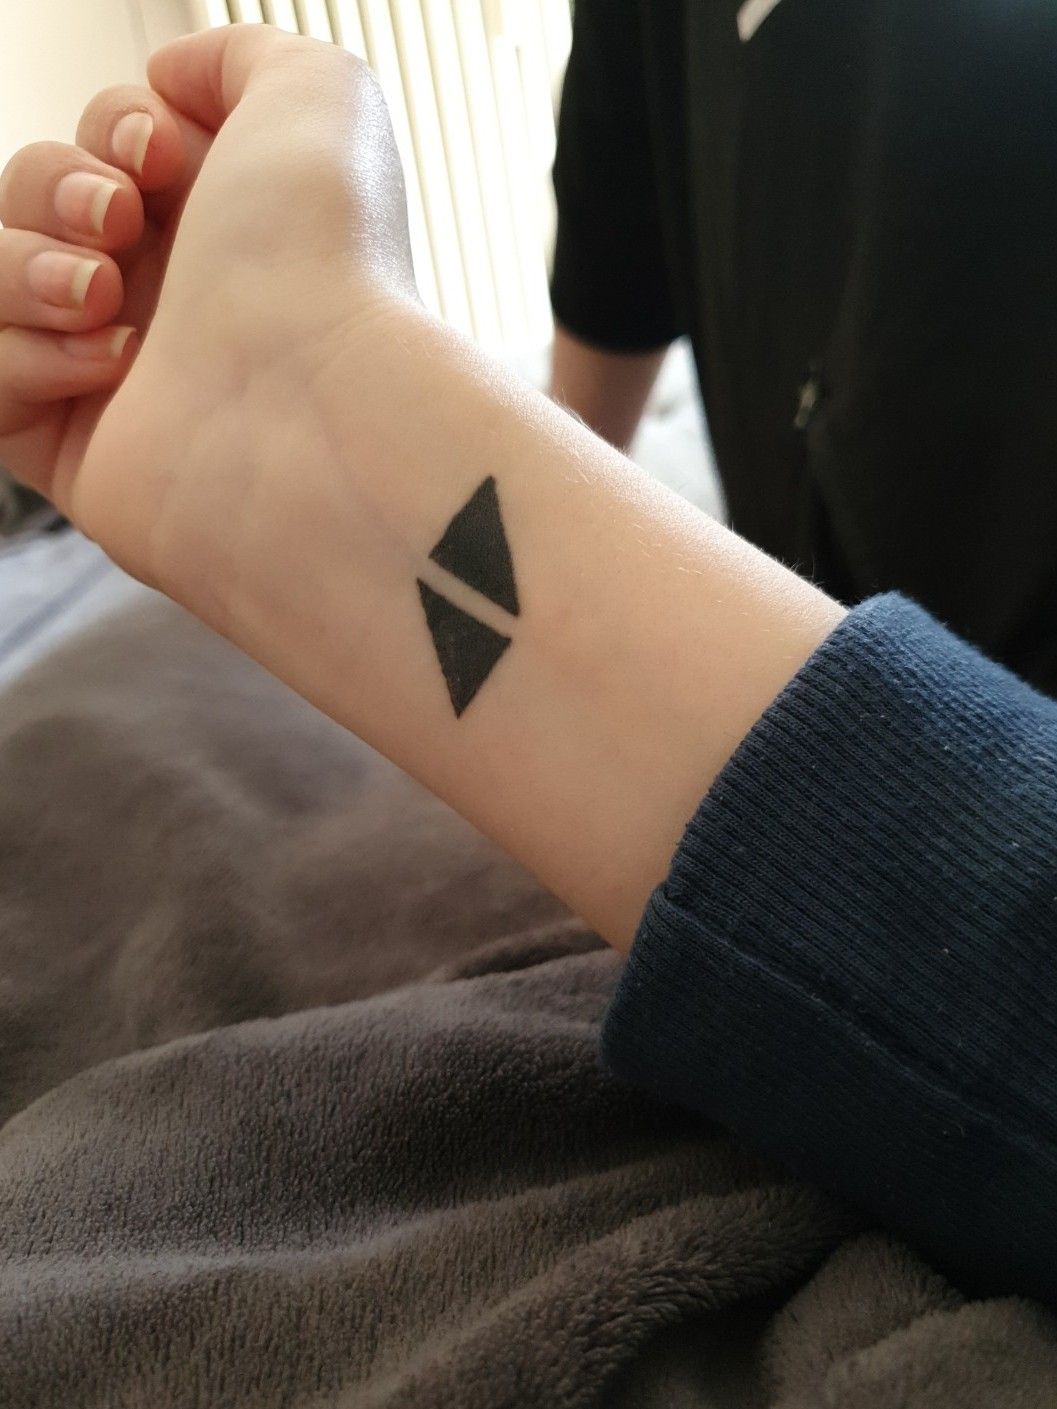 10 Best Avicii Tattoo Ideas Youll Have To See To Believe 